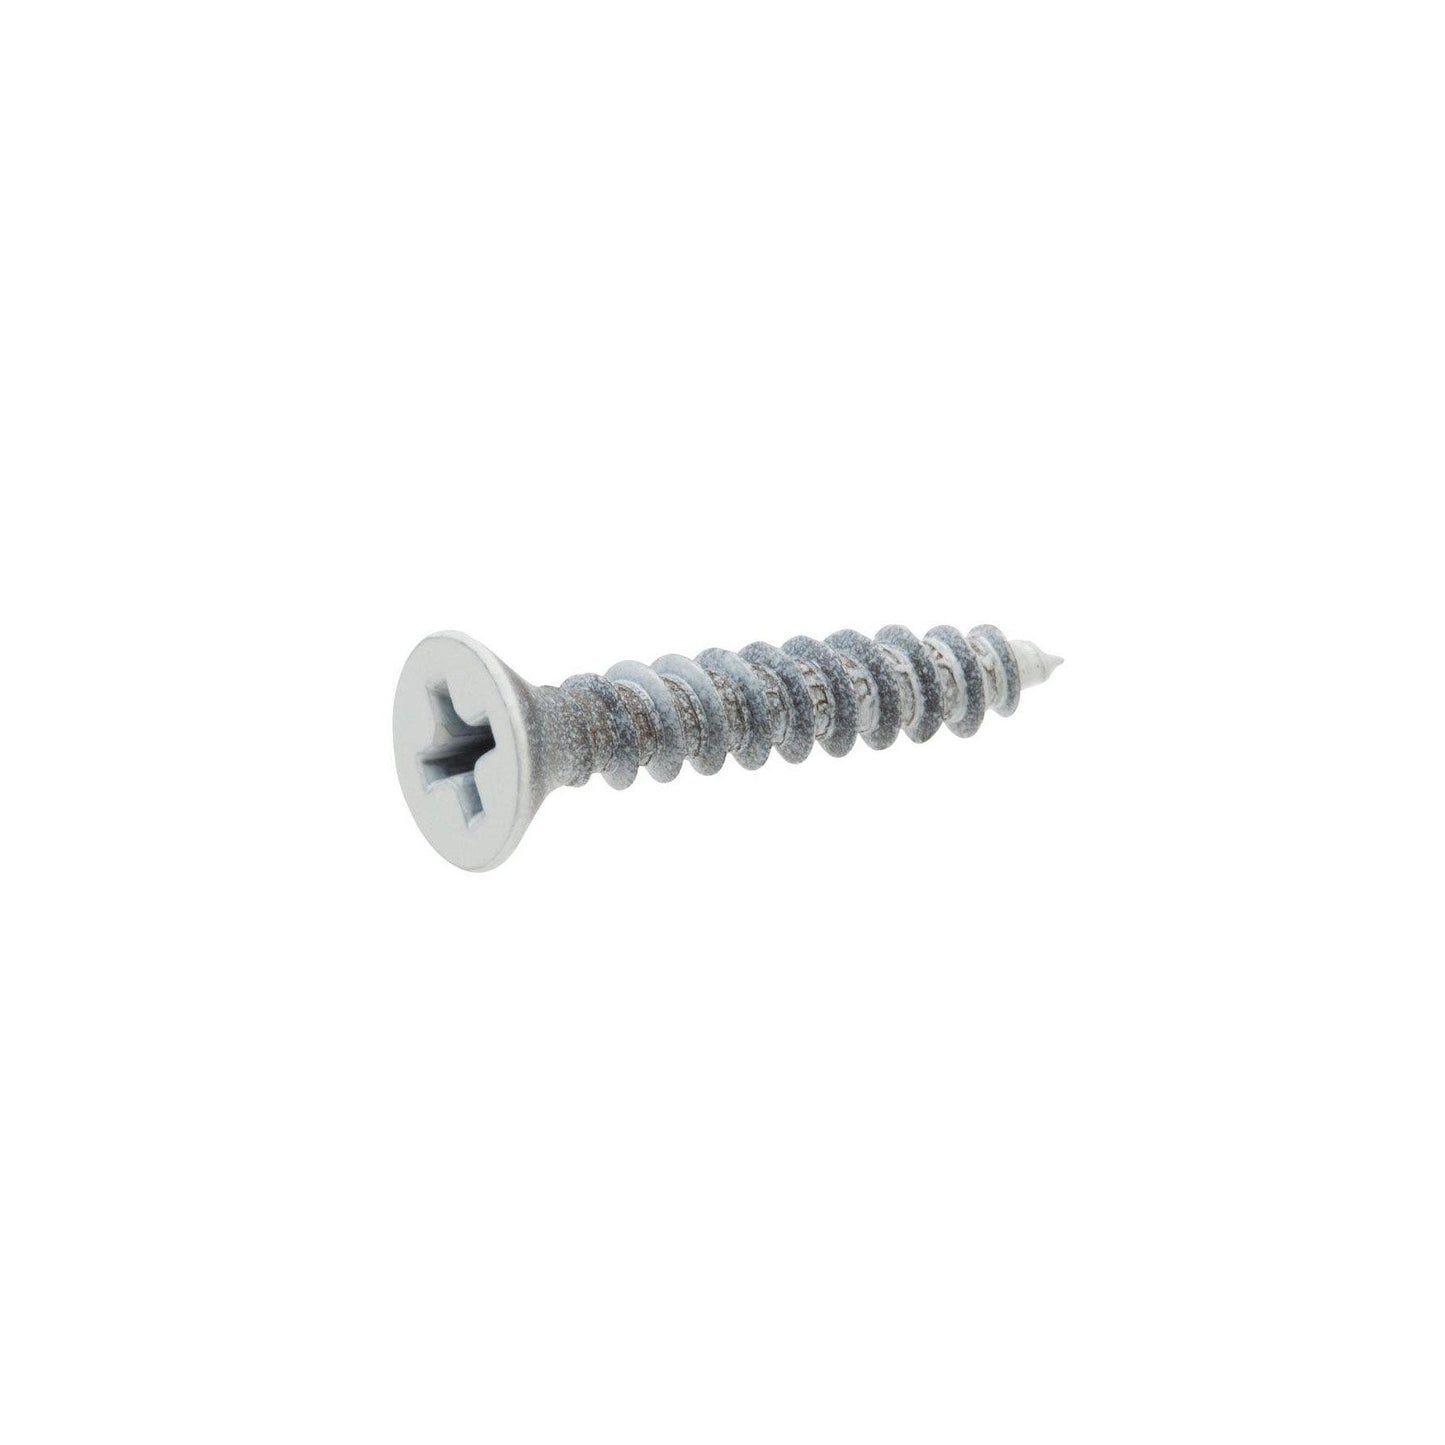 6 x 1/2'' Pozi Pan Self Tapping Screws DIY 0039 (Large Letter Rate)